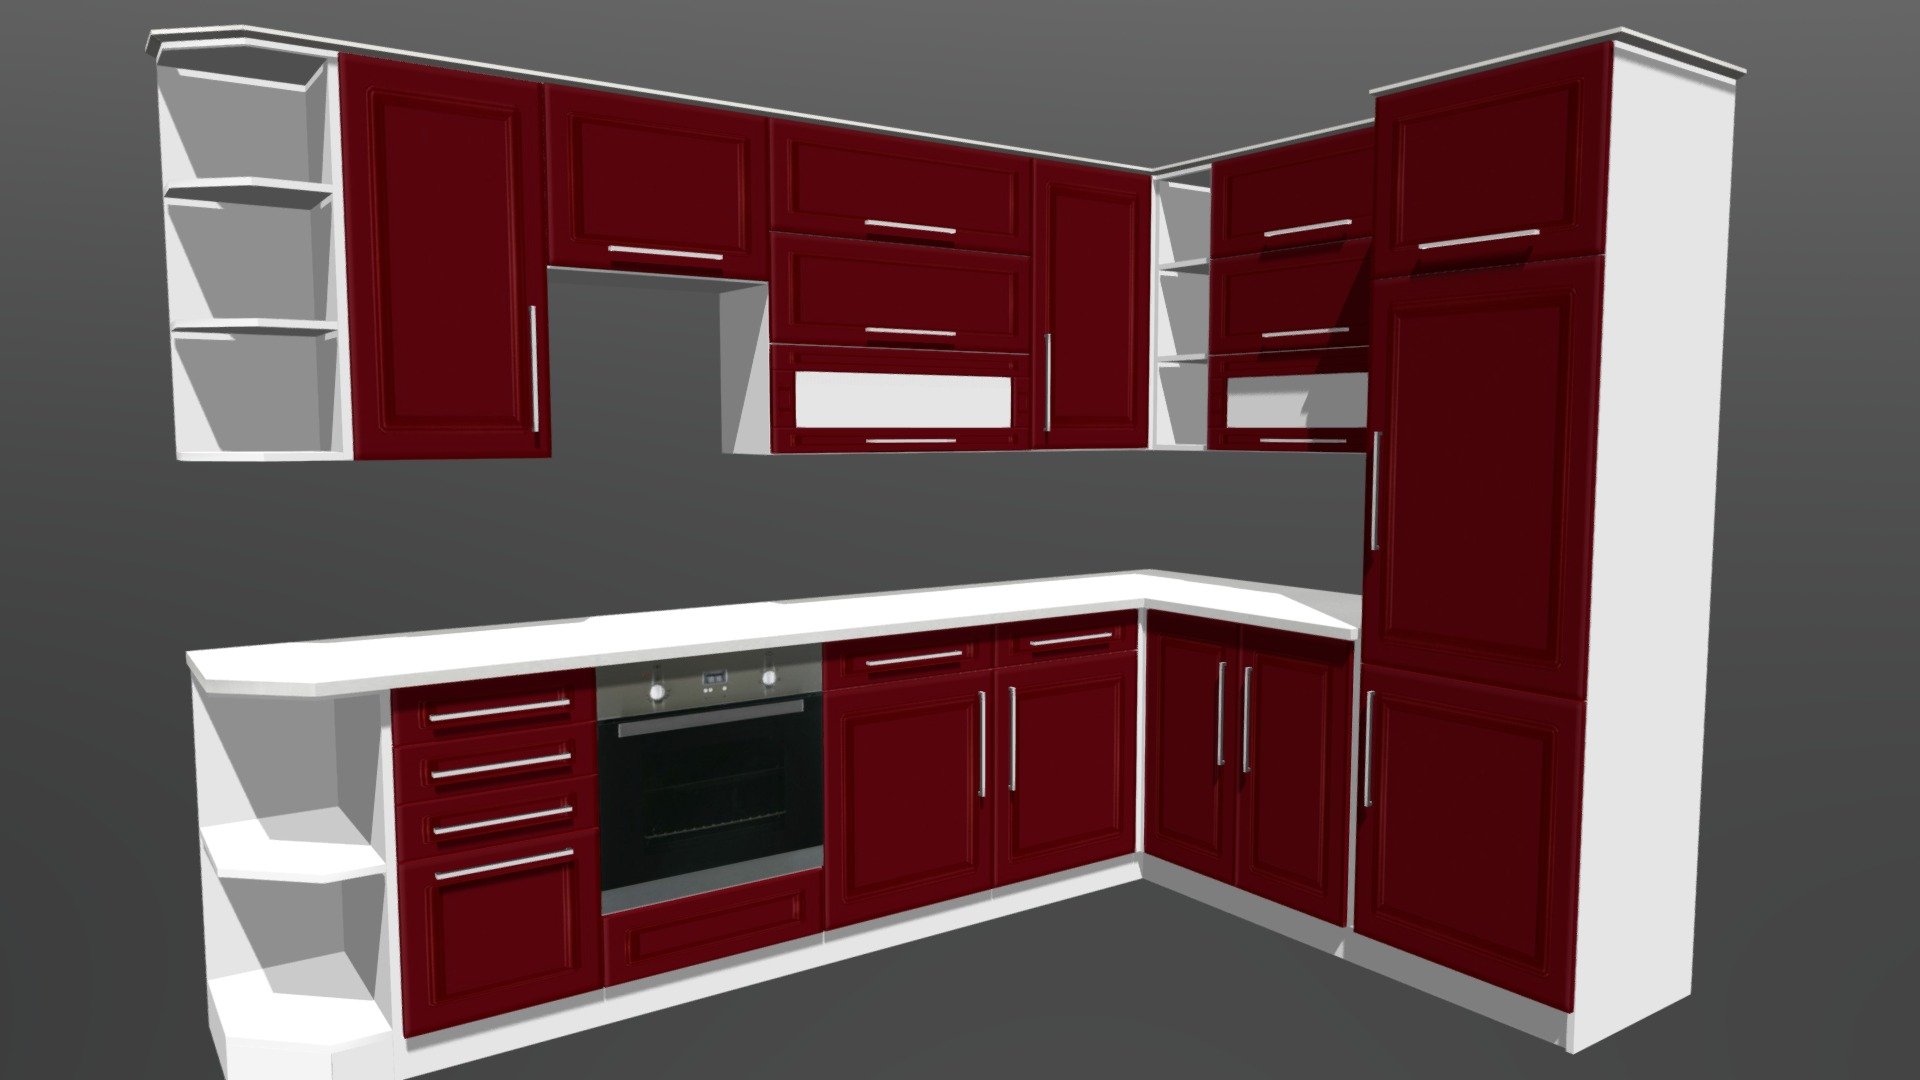 Kitchen cabinet created by free cabinet deisgn software. 
The modell can also be downloaded in its original file format.
It also contains the parts list and assembly drawings.
Based on these, the furniture can be built in reality.
The cad software can be downloaded here: http://www.freecabinetcad.com

Az ms_Bútortervező ingyenes programmal készített konyhabútor. A rajz elérhető az eredeti fájlformátumban is. A tervező szoftver innen letölthető : http://www.butortervezo.com

L:3110 mm W:2005 mm H:2275 mm - Kitchen cabinet 5 - Buy Royalty Free 3D model by ms_Butor (@butortervezo) 3d model